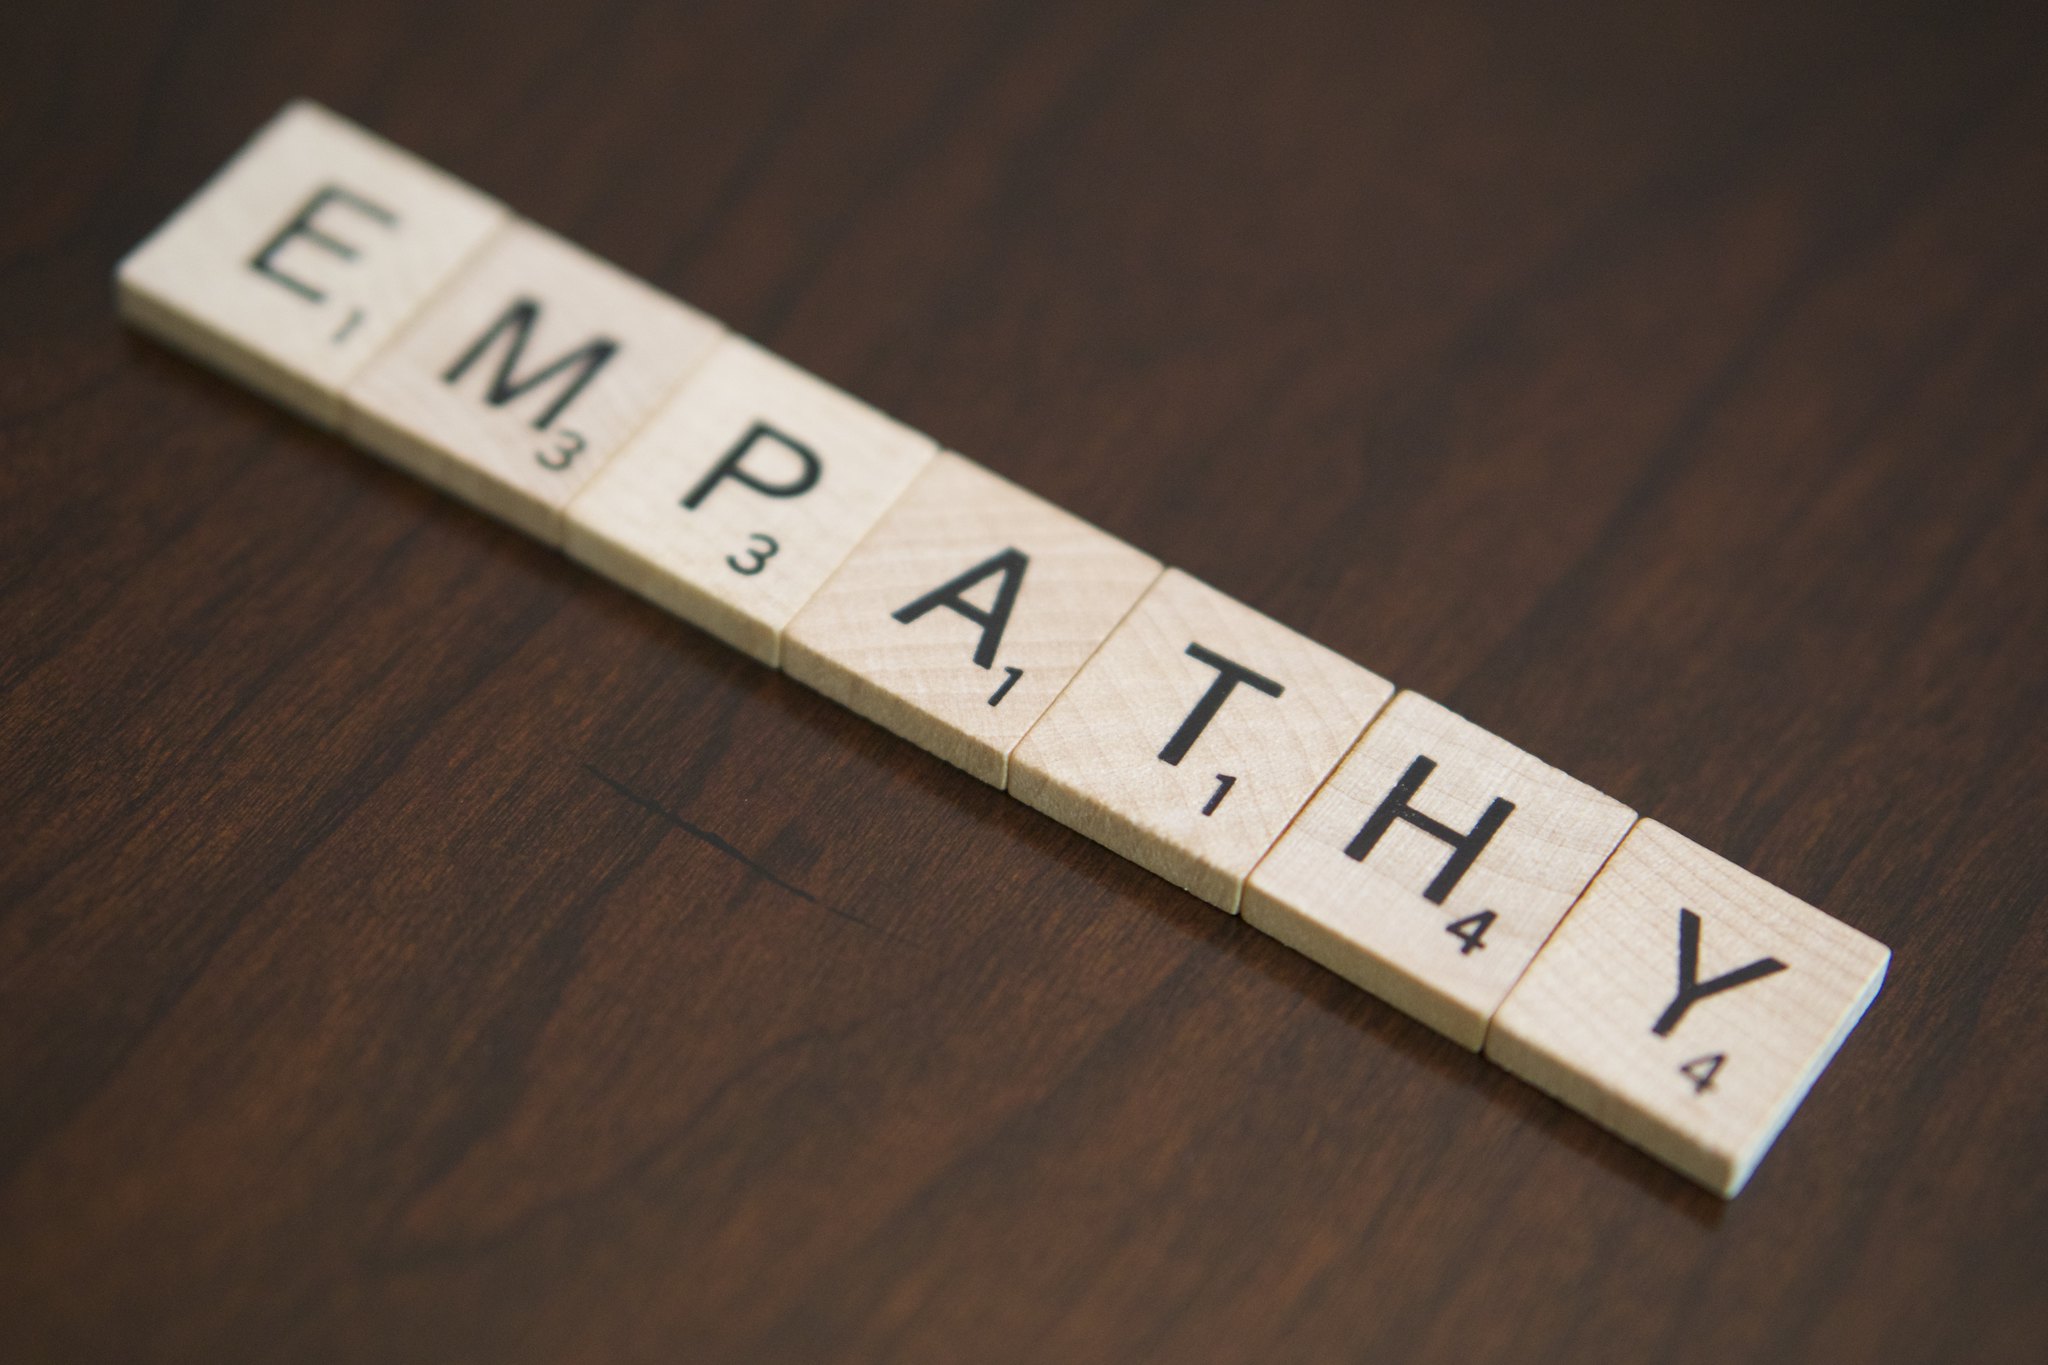 37 Compassion And Empathy Quotes By Brene Brown & More